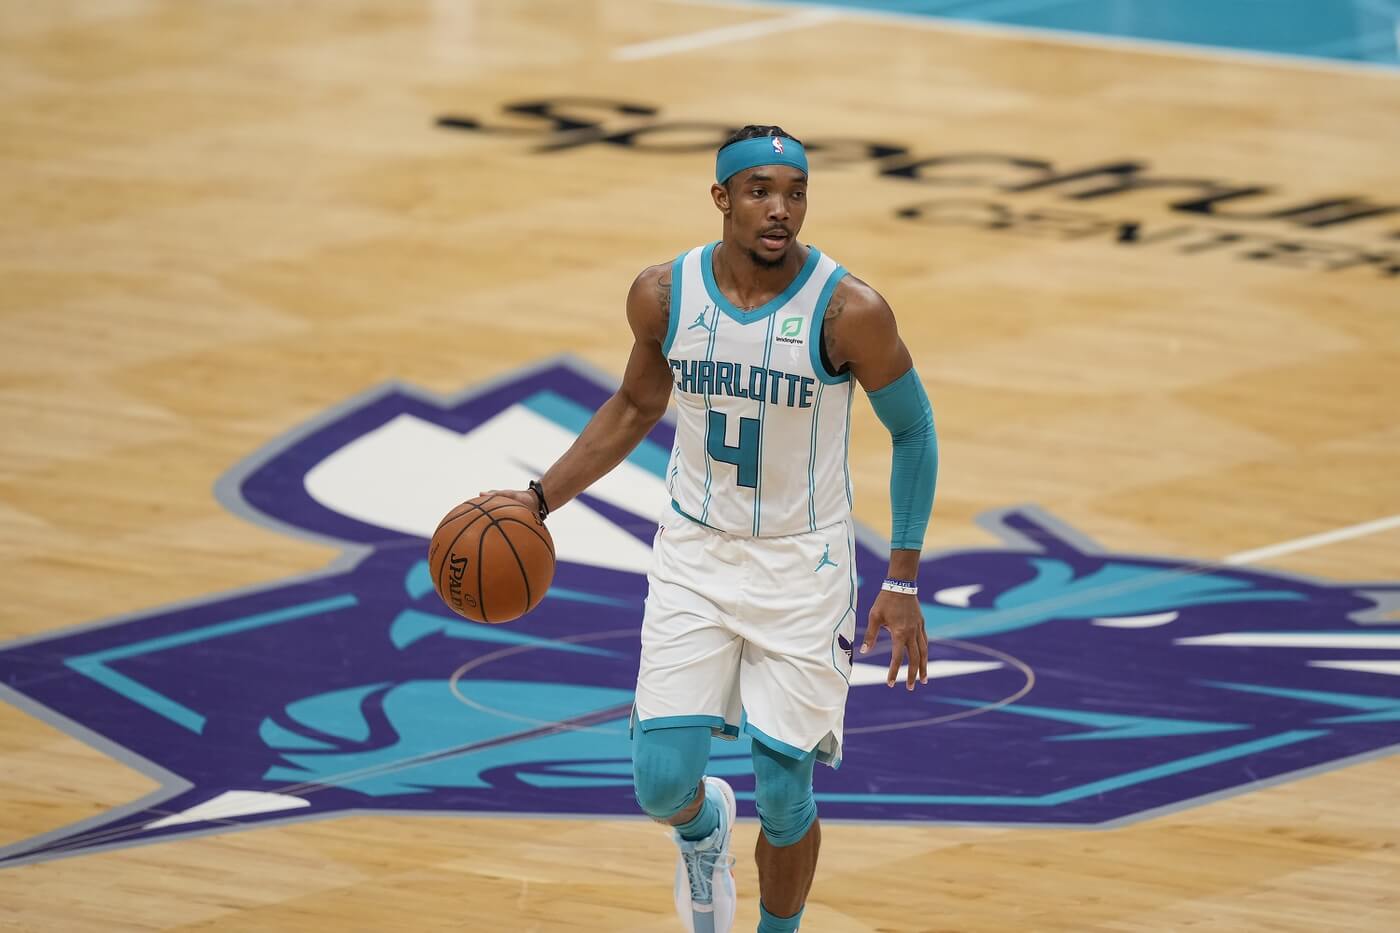 Apr 14, 2021; Charlotte, North Carolina, USA; Charlotte Hornets guard Devonte' Graham (4) handles the ball during the second half against the Cleveland Cavaliers at the Spectrum Center. Mandatory Credit: Jim Dedmon-USA TODAY Sports